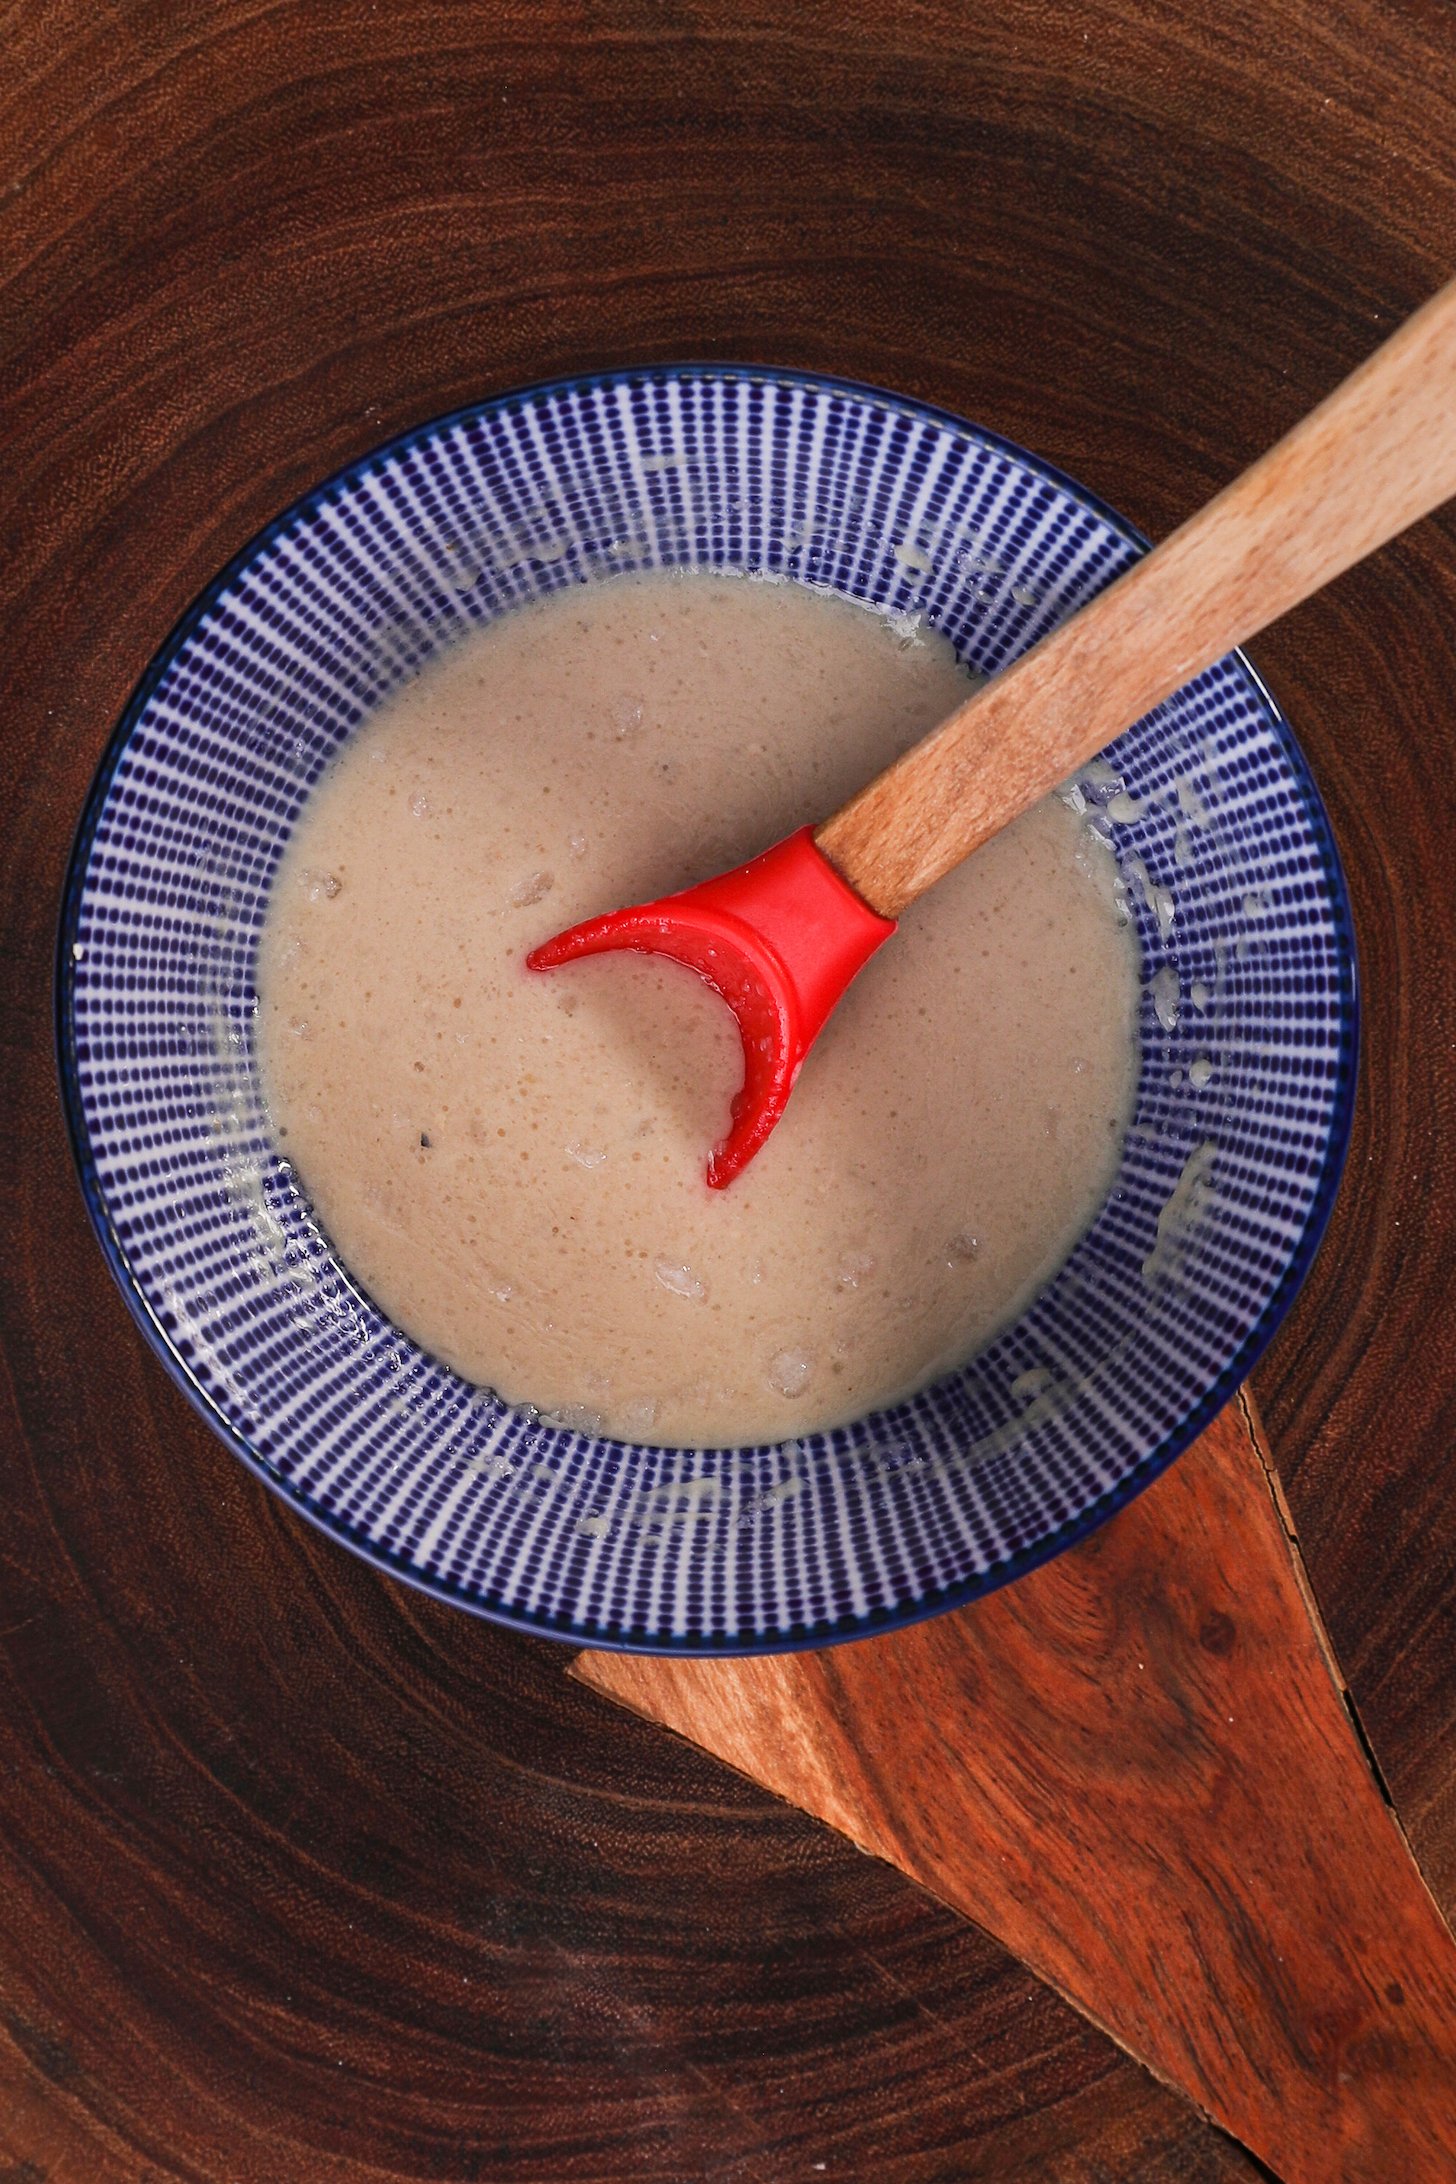 A blue bowl with stripes containing a beige liquid with a red spoon dipped in it.